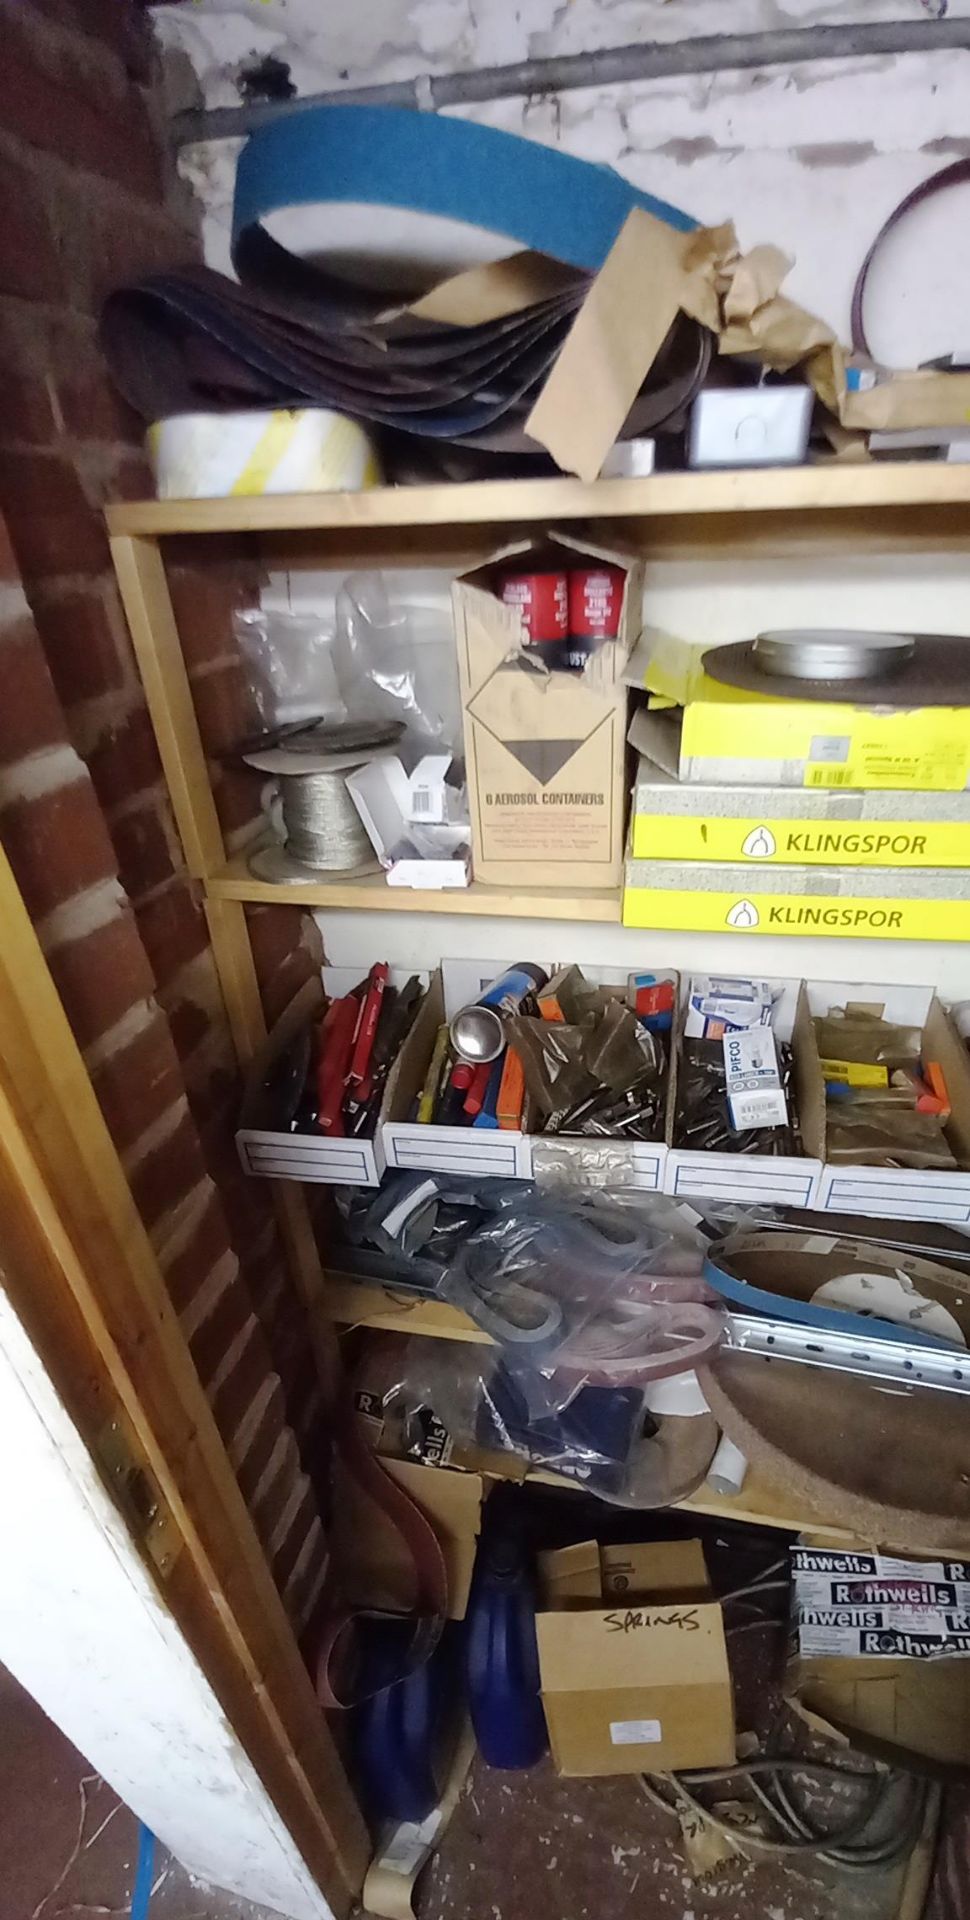 Contents to Storage Cupboard to Include Taps, Dye's, Reemers, Cutting Disks, Cutting Oils etc - Image 3 of 3